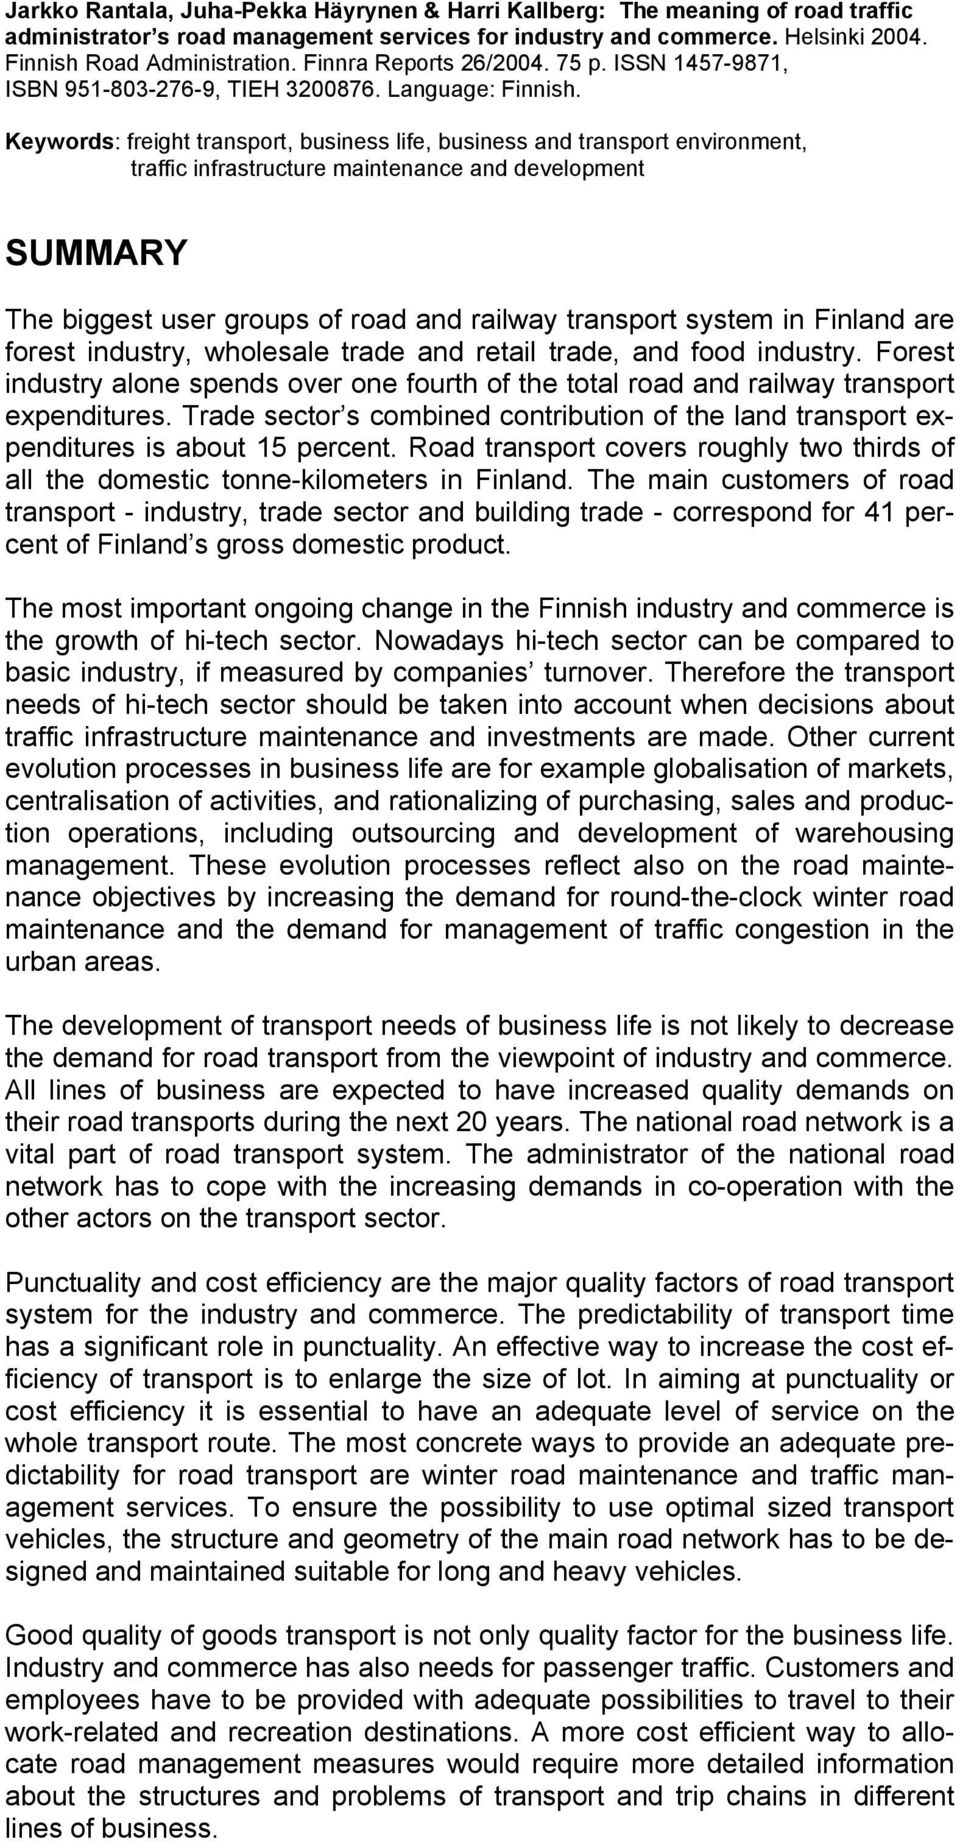 Keywords: freight transport, business life, business and transport environment, traffic infrastructure maintenance and development SUMMARY The biggest user groups of road and railway transport system